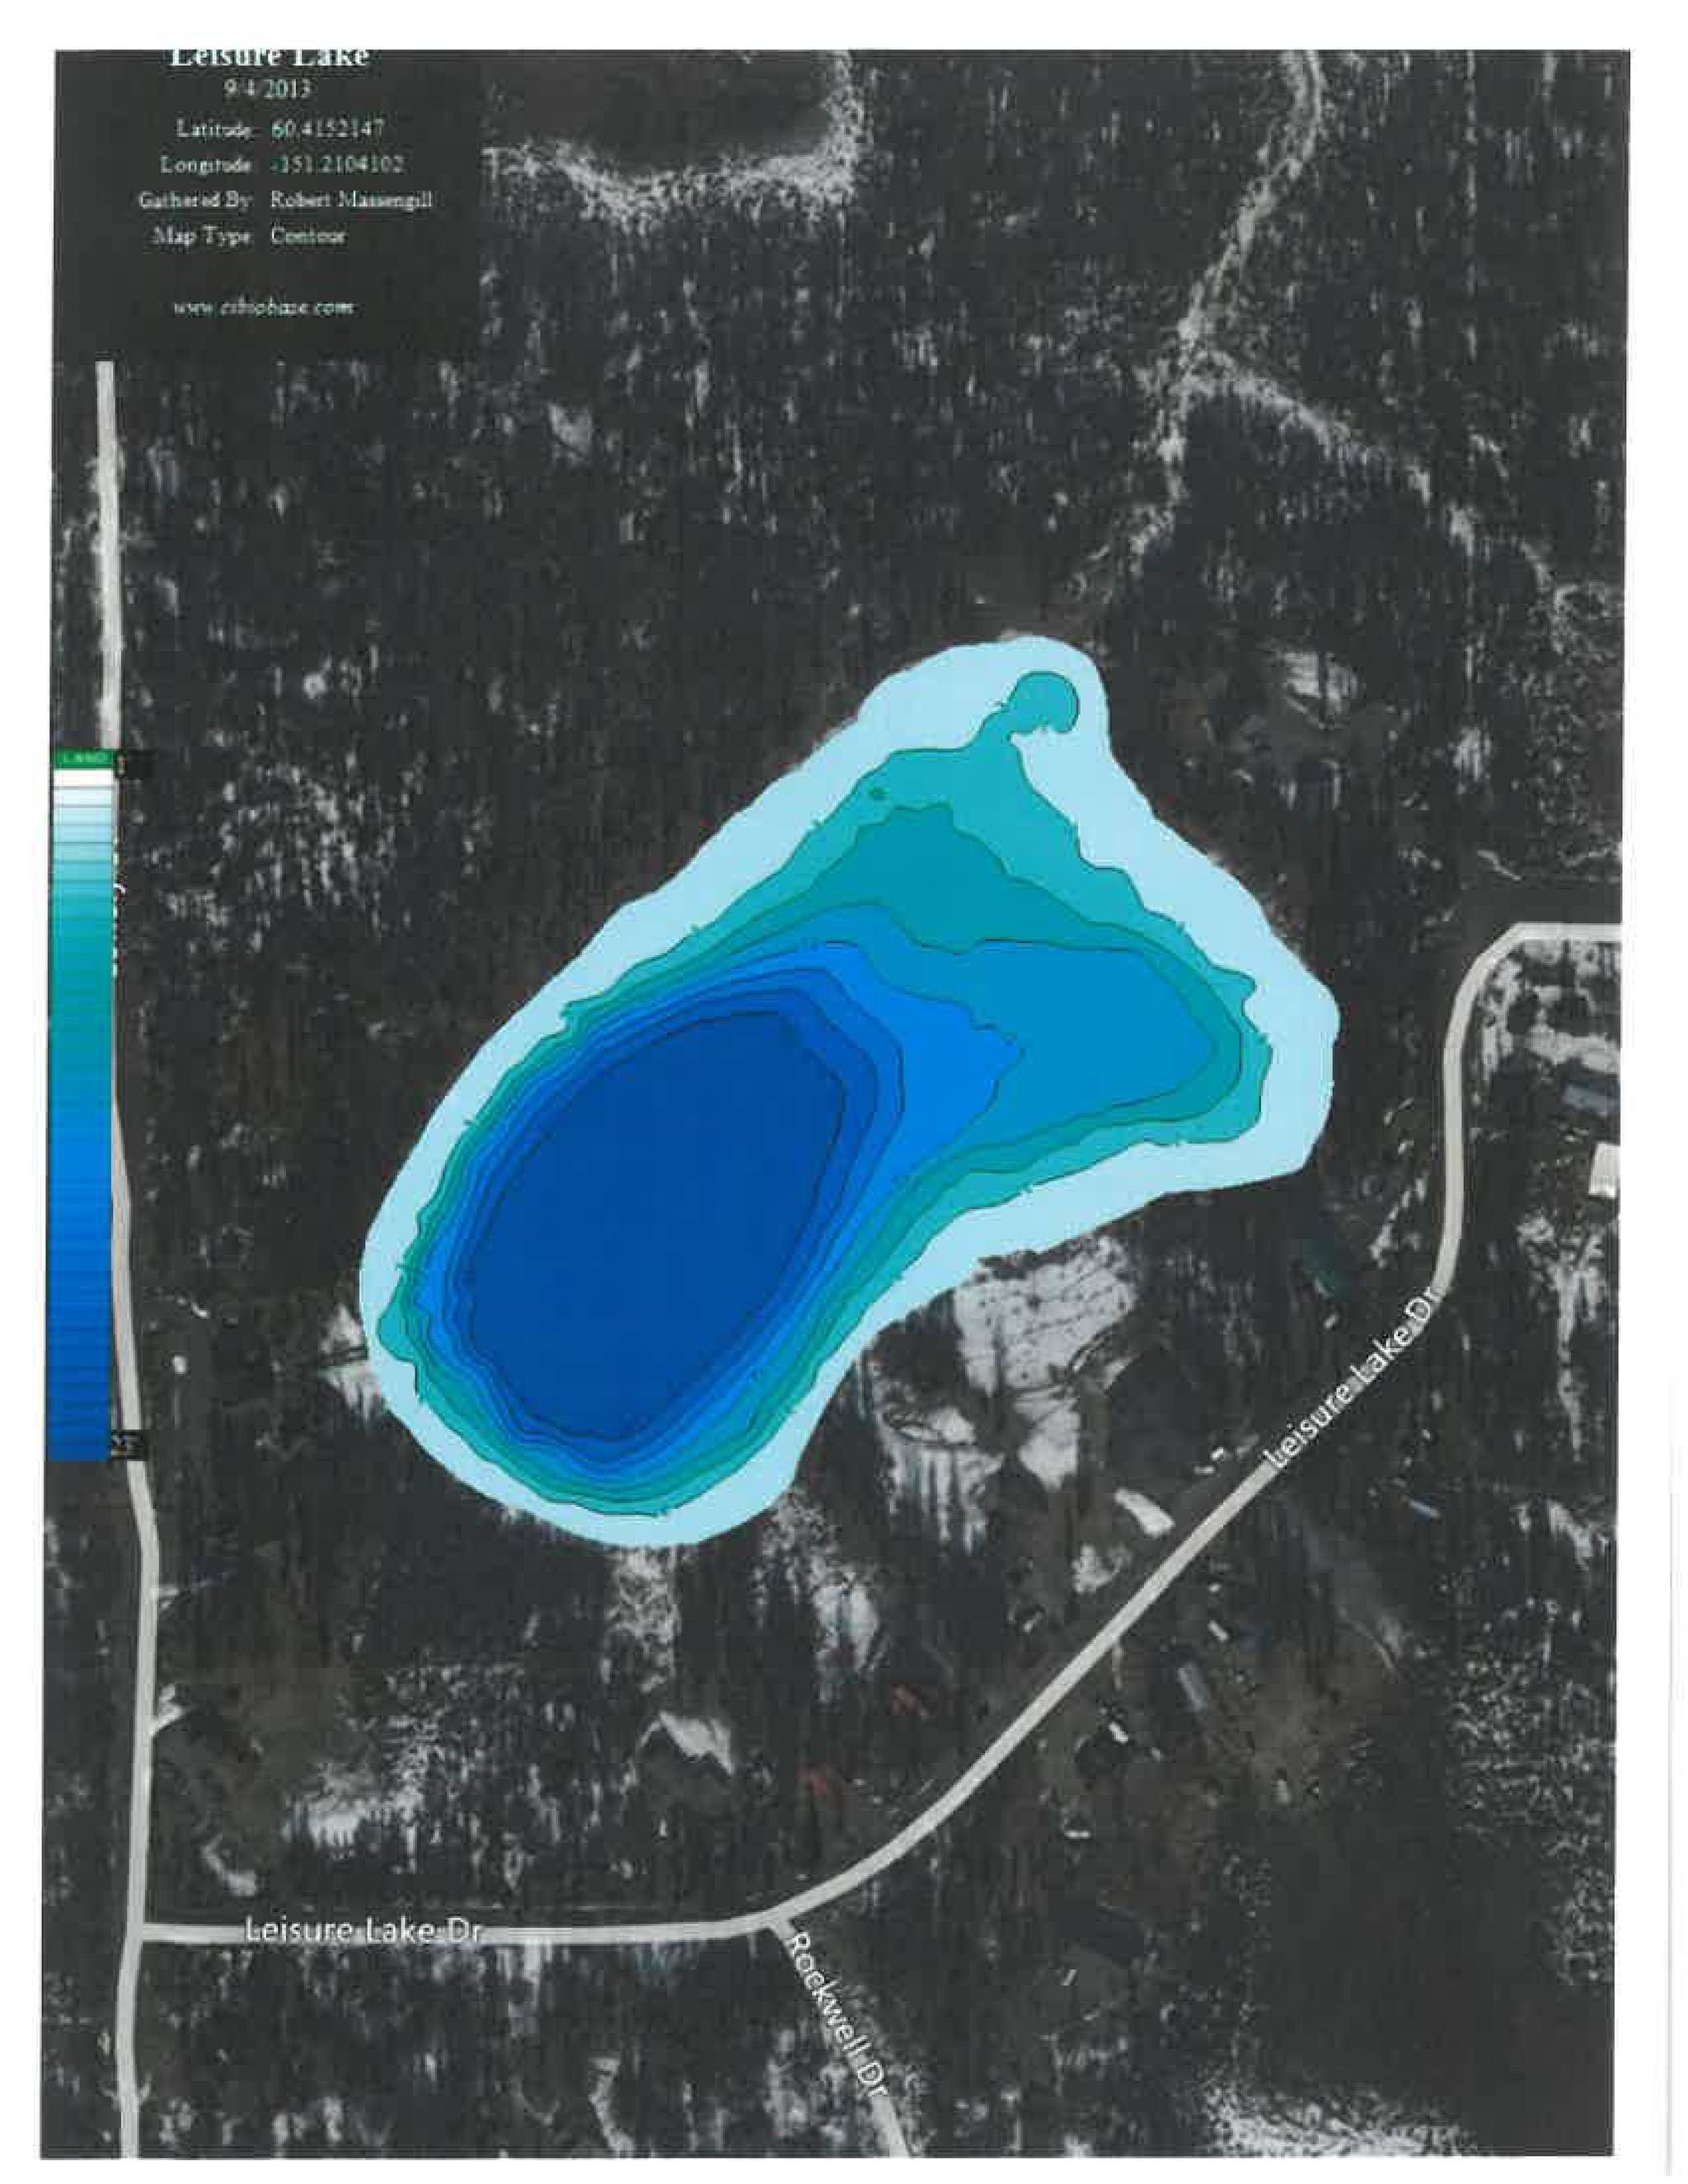 This bathymetric map from the Alaska Department of Fish and Game shows Hope Lake, one of the lakes in the Tote Road area known to contain pike. (Courtesy the Alaska Department of Fish and Game)